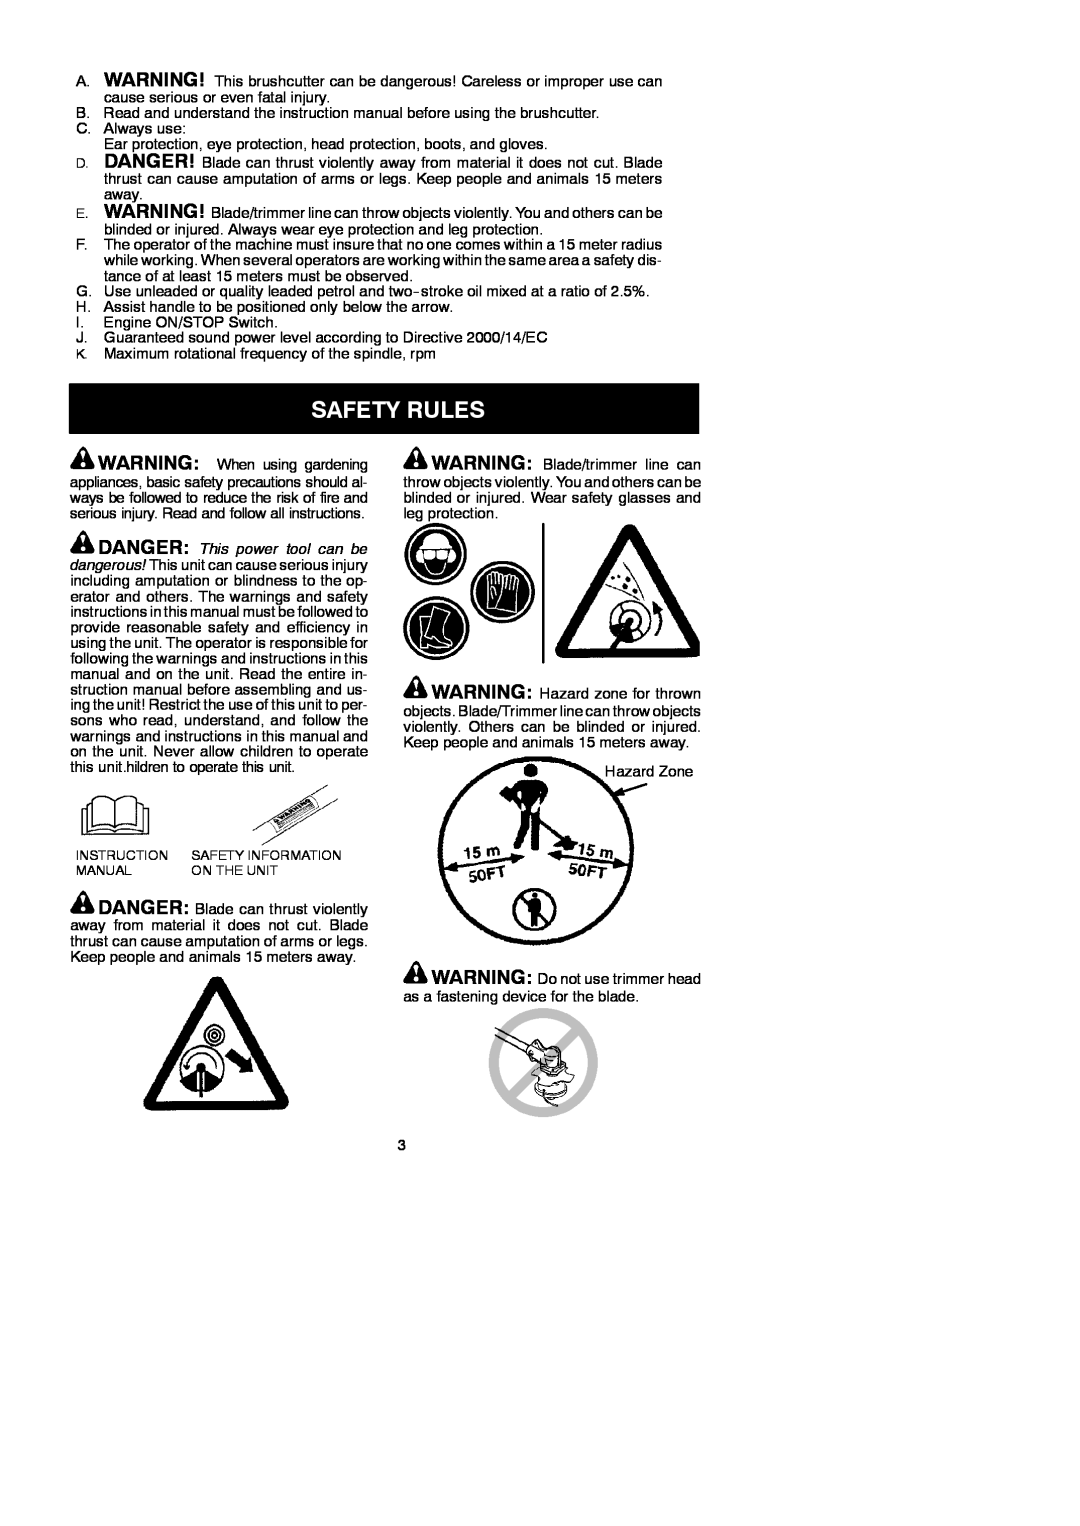 Partner Tech T330+ instruction manual Safety Rules, DANGER This power tool can be 